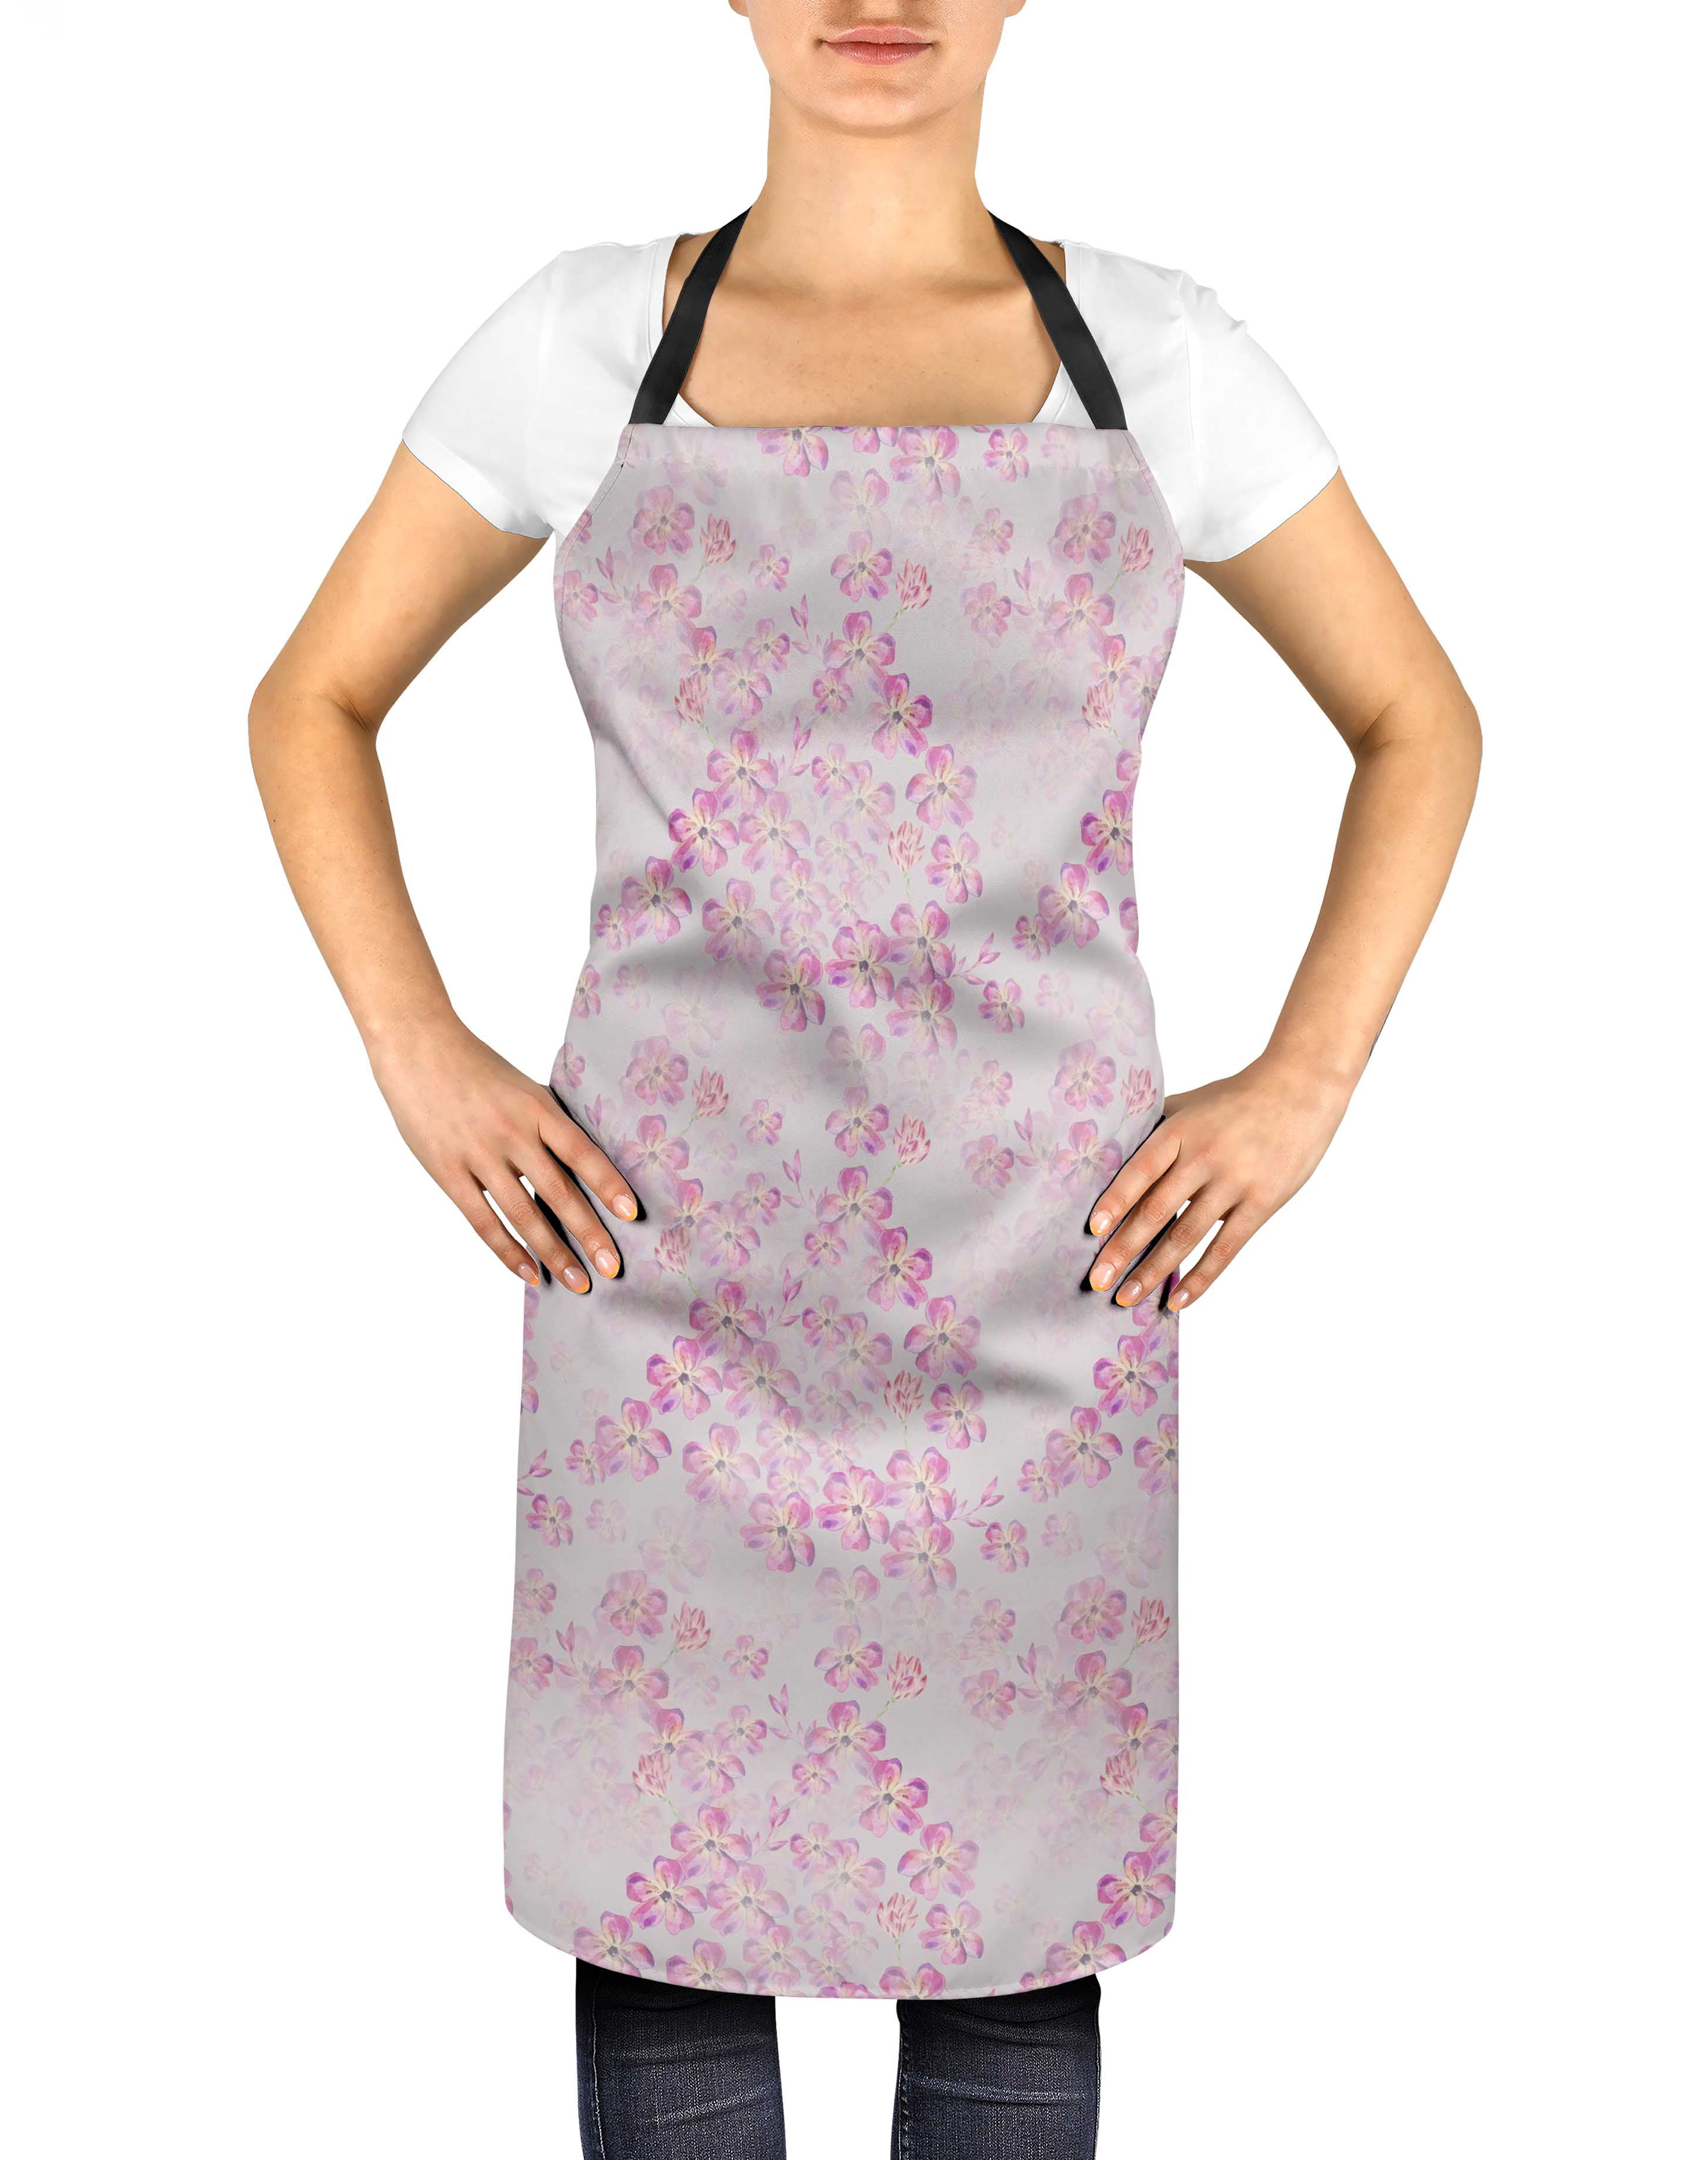 Fully Adjustable with Tie Strings Vintage Floral Poly Cotton Apron for Women 